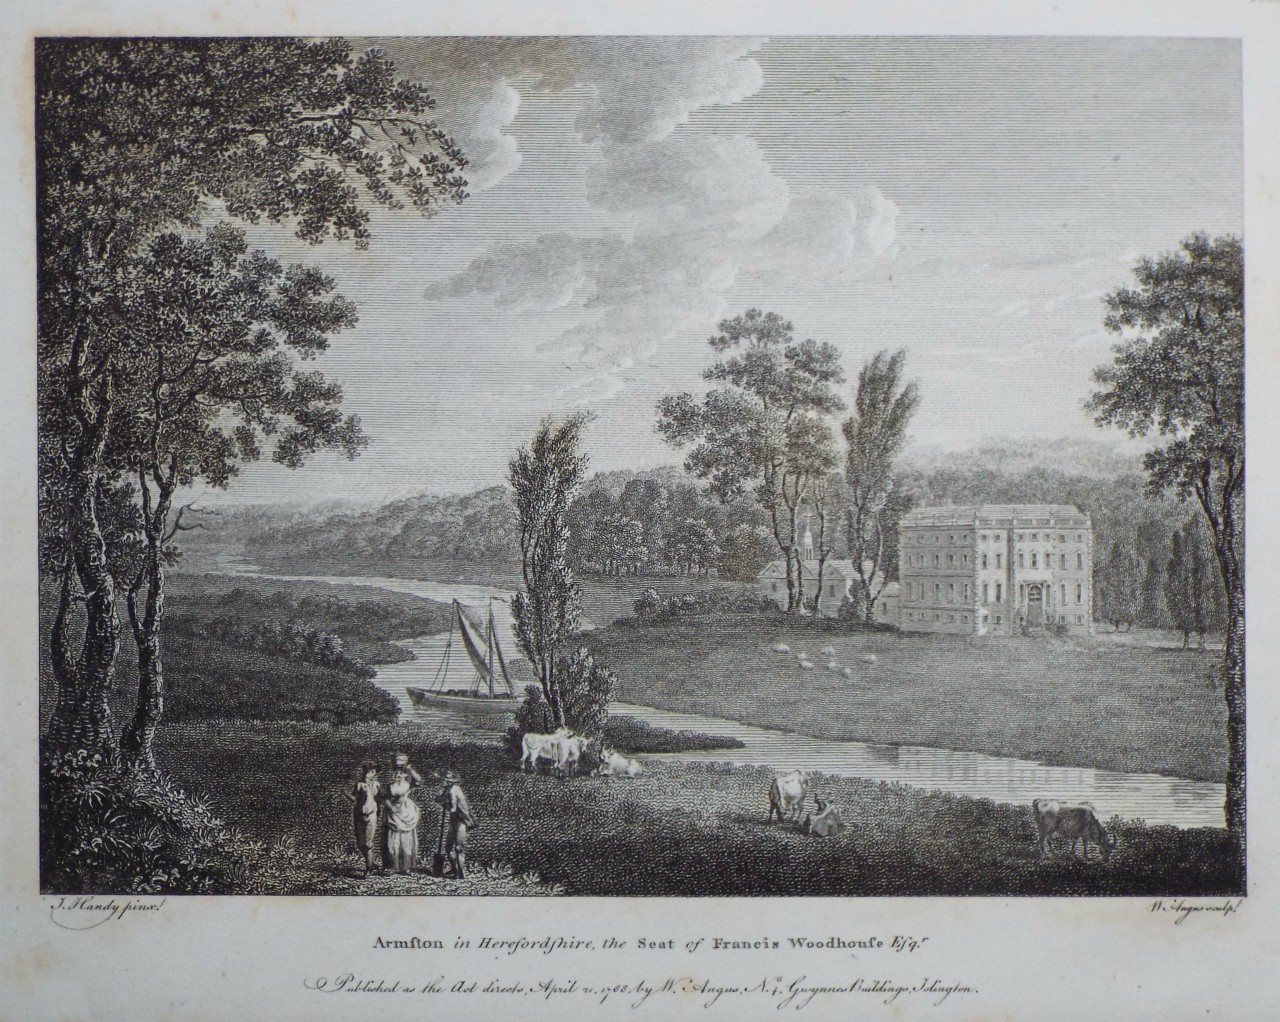 Print - Armston in Herefordshire, the Seat of Francis Woodhouse Esqr. - Angus